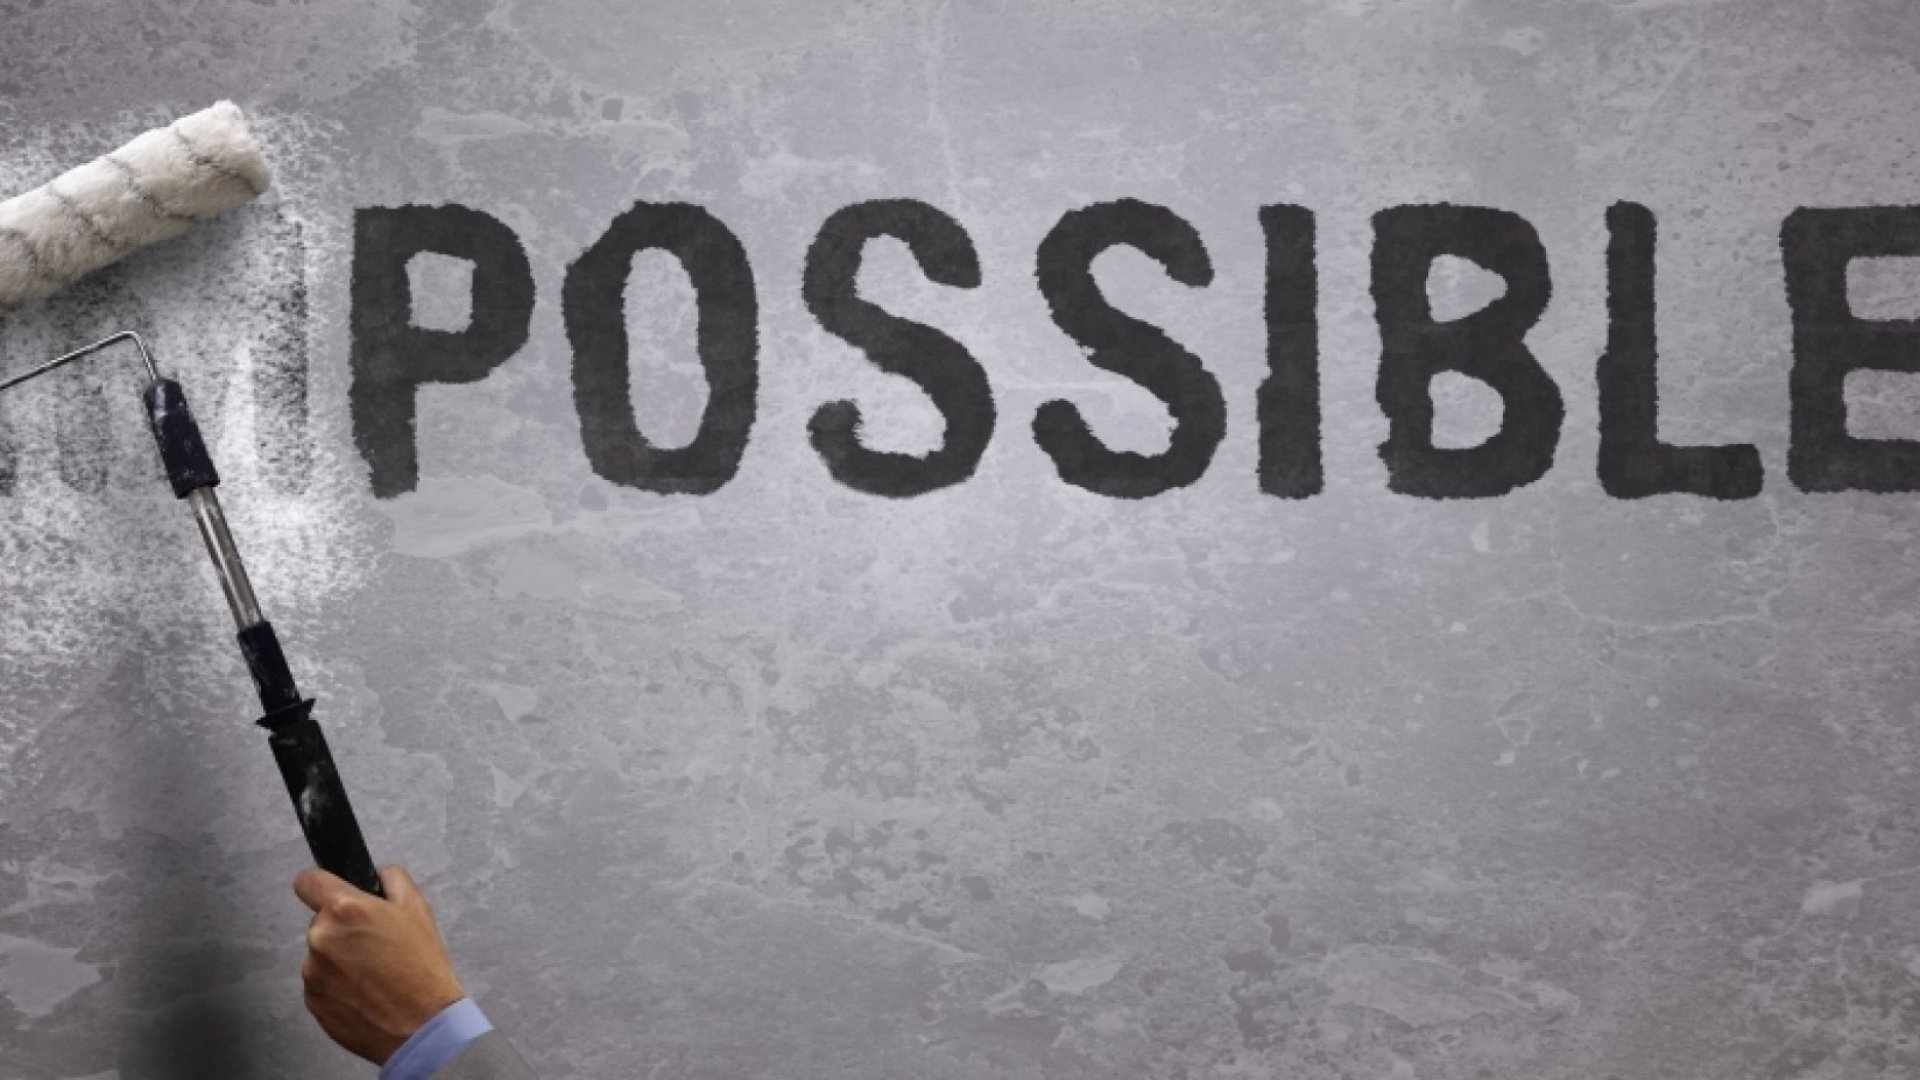 Make the Impossible, Possible